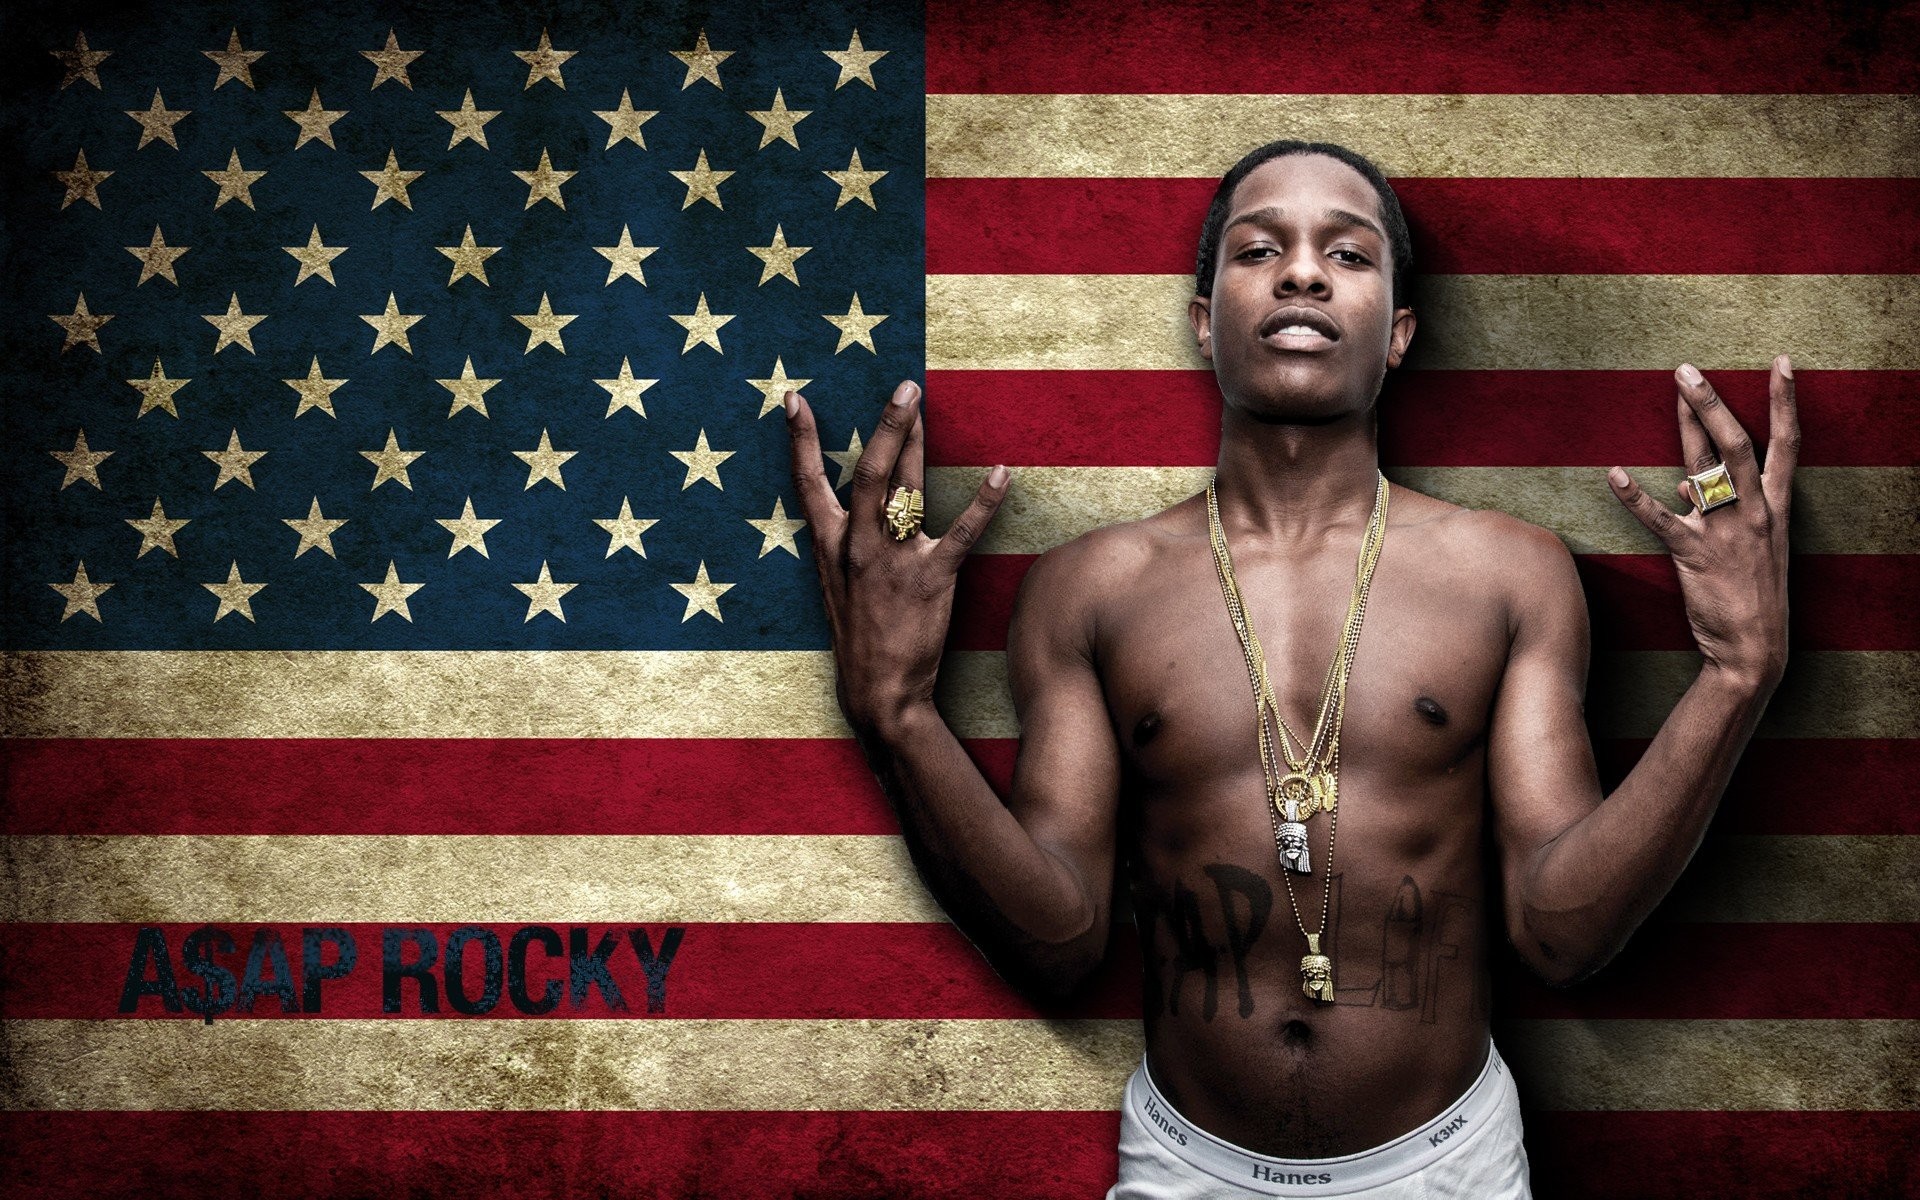 1920x1200 HD Widescreen Images Collection of ASAP Rocky: Epaphras Keable